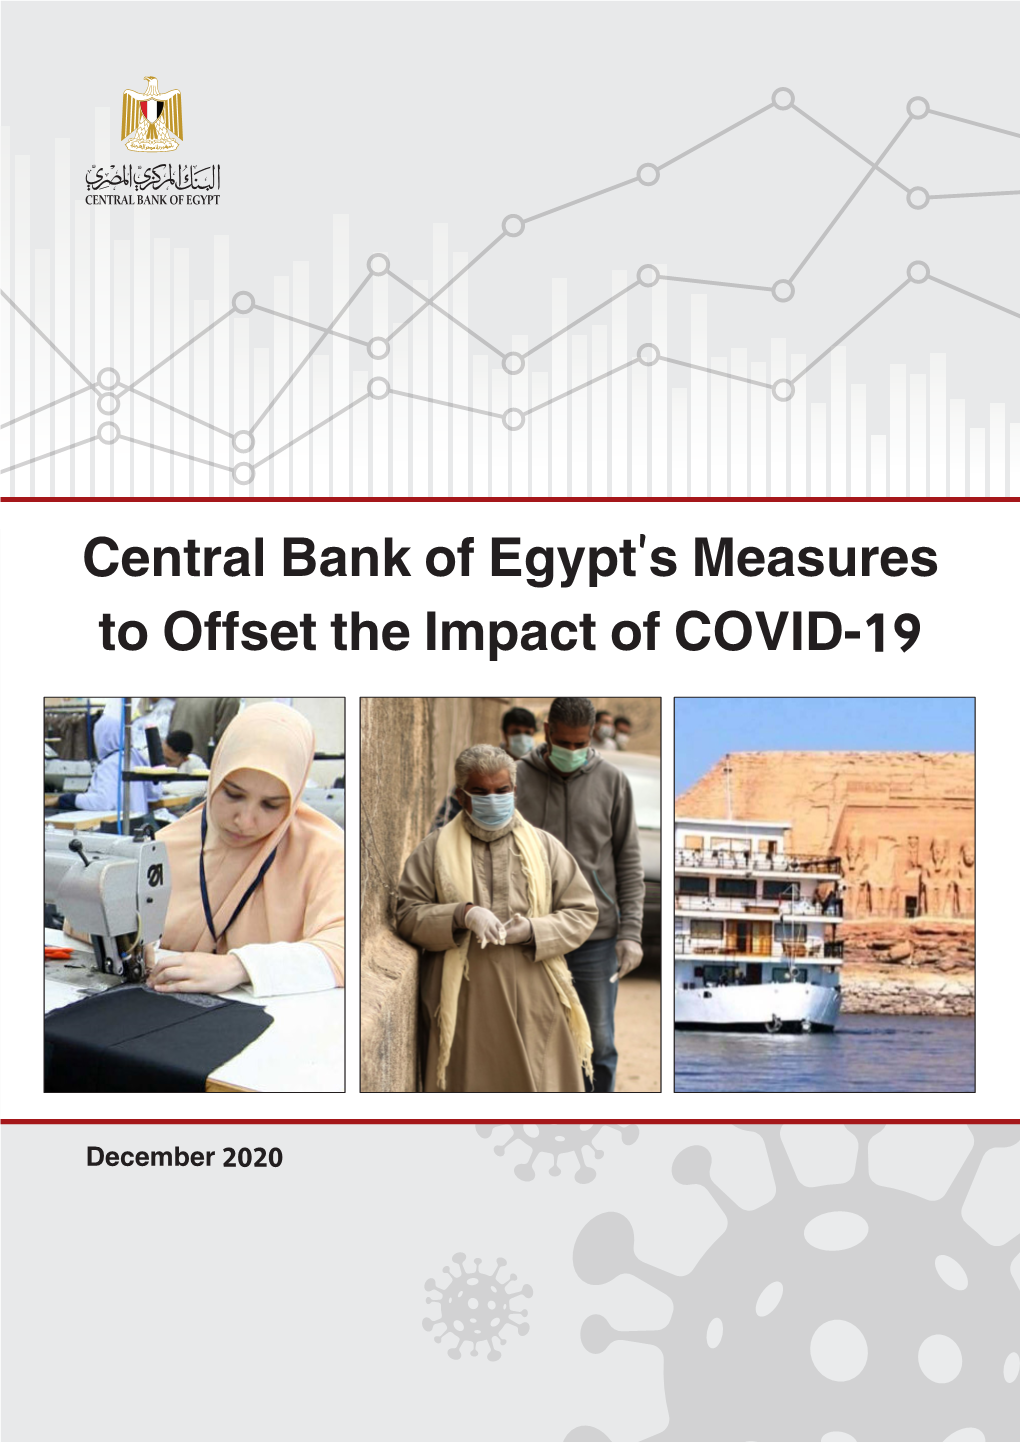 Central Bank of Egypt's Measures to Offset the Impact of COVID-19